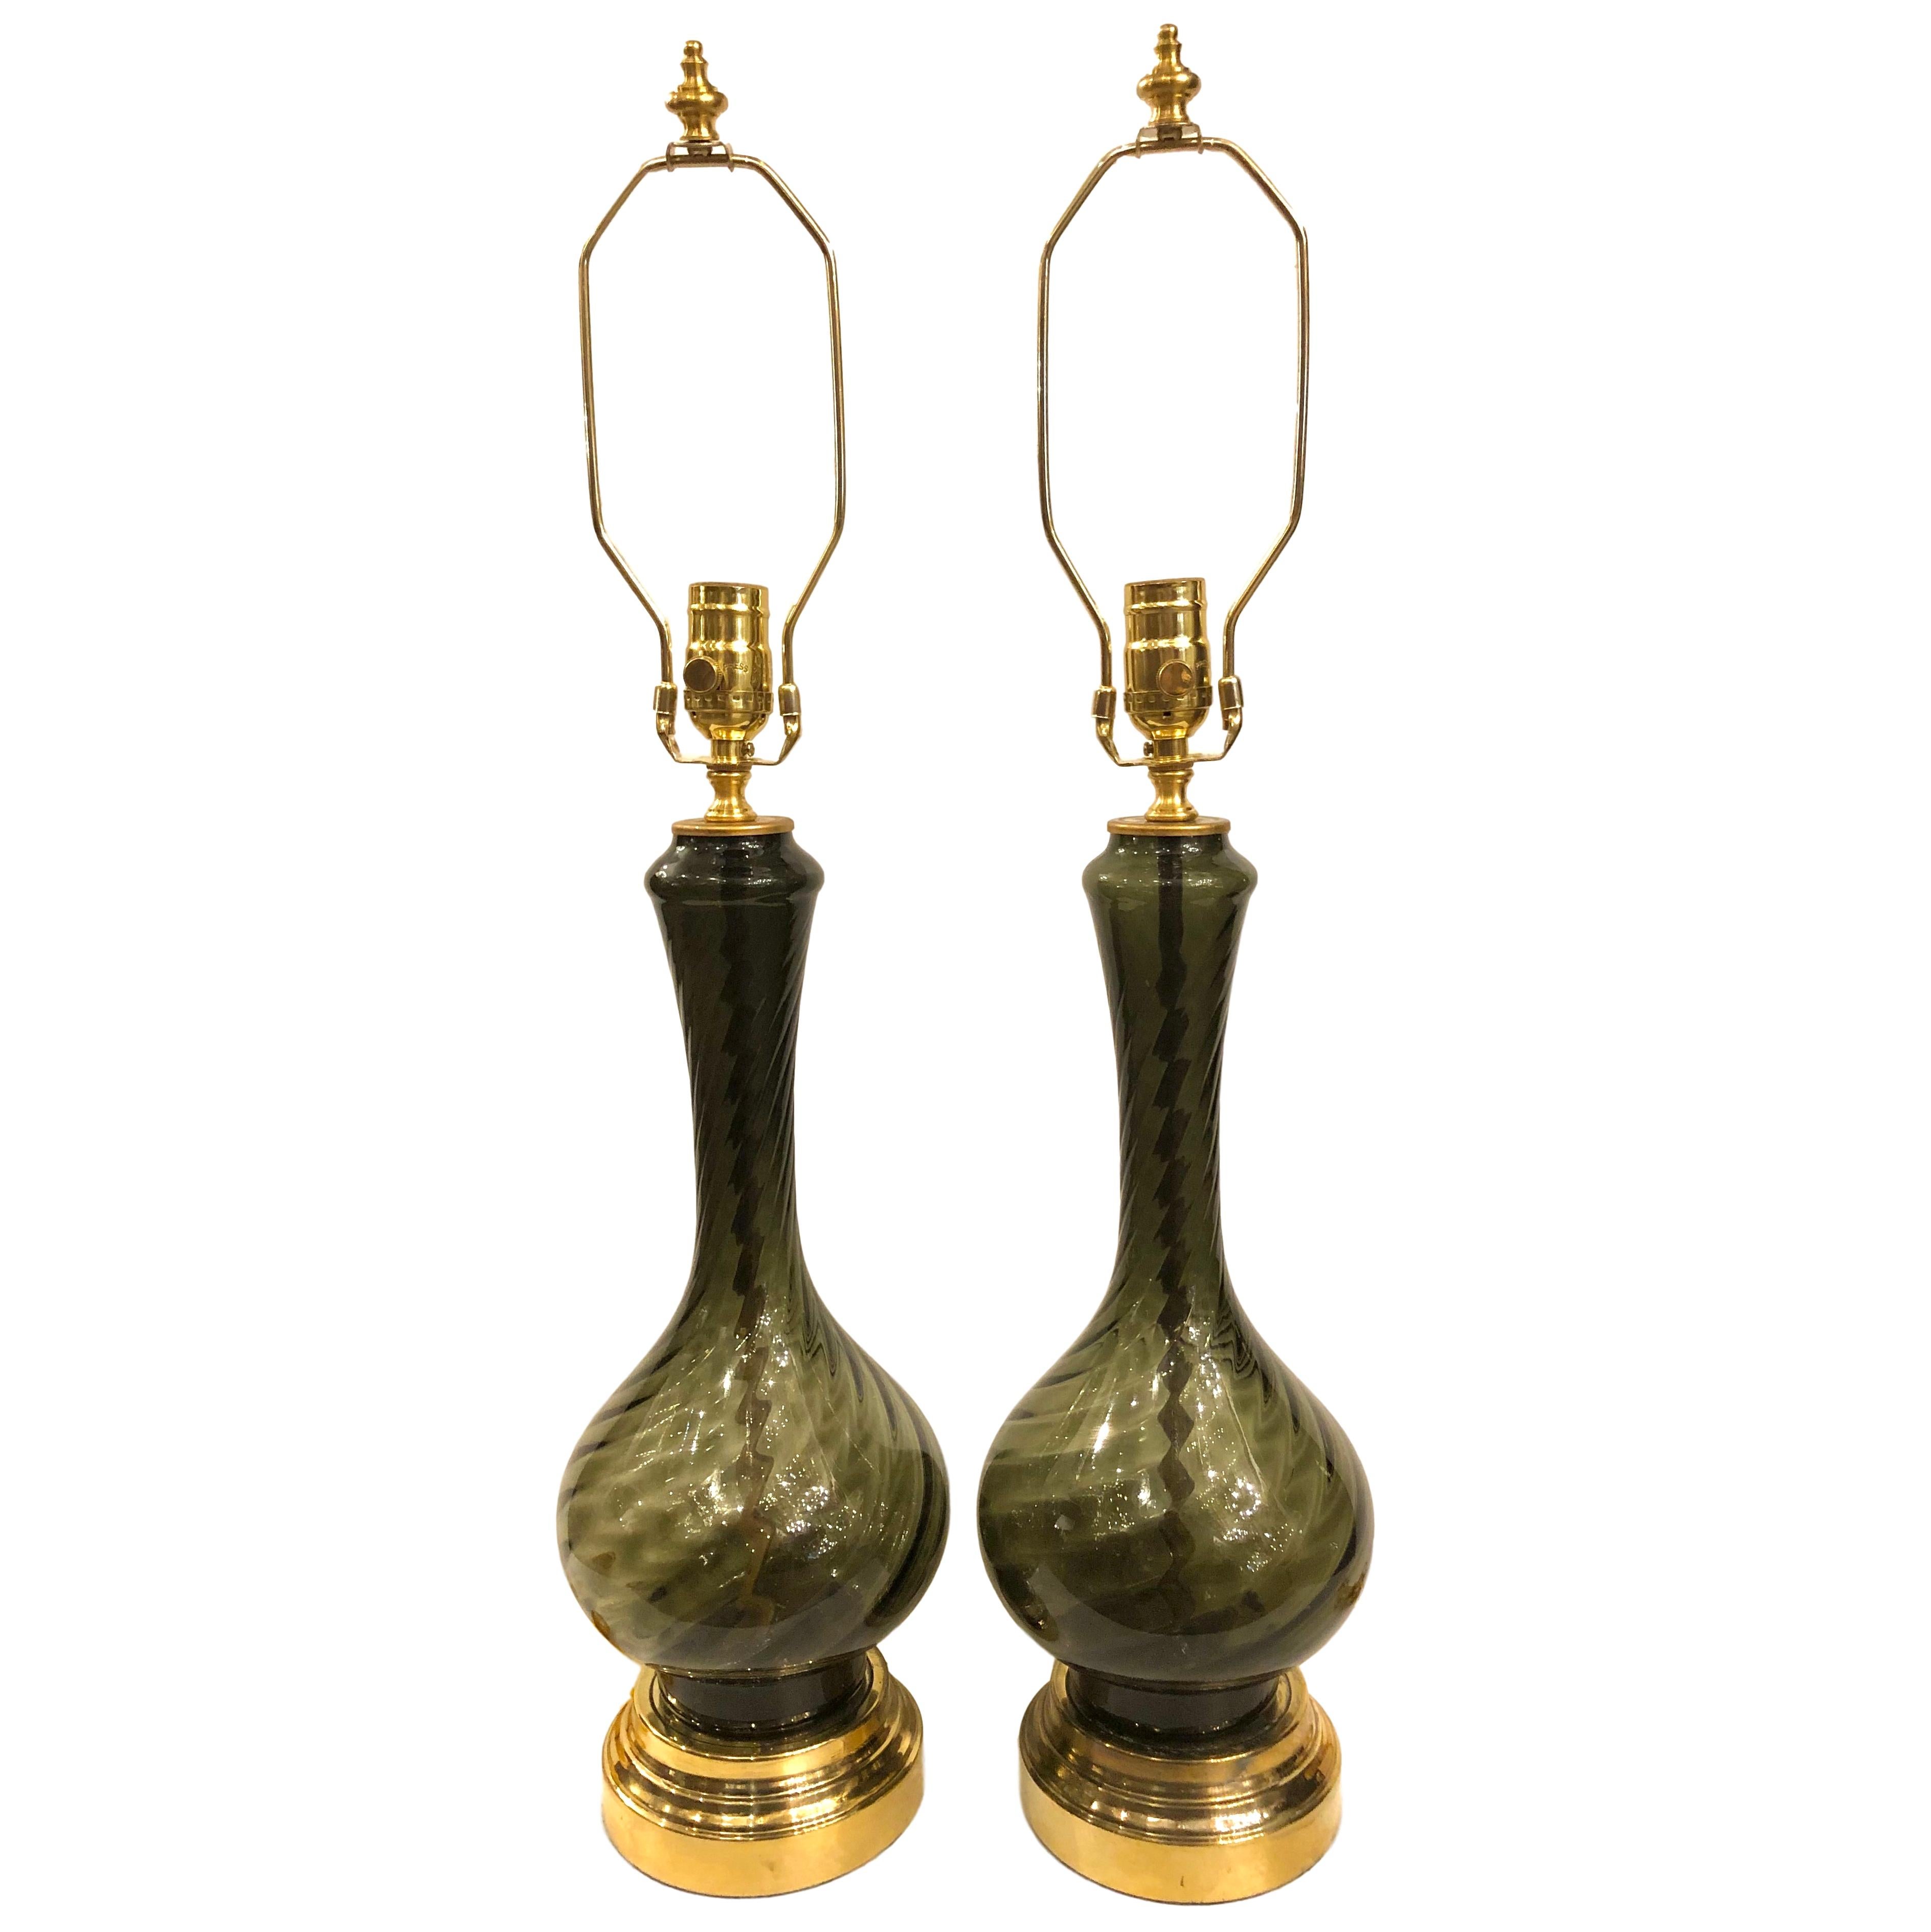 Pair of circa 1960s French smoke glass table lamps with twisting texture and gilt bases.

Measurements:
Height of body 17.5?
Height to shade rest 27?
Diameter at widest 7?.